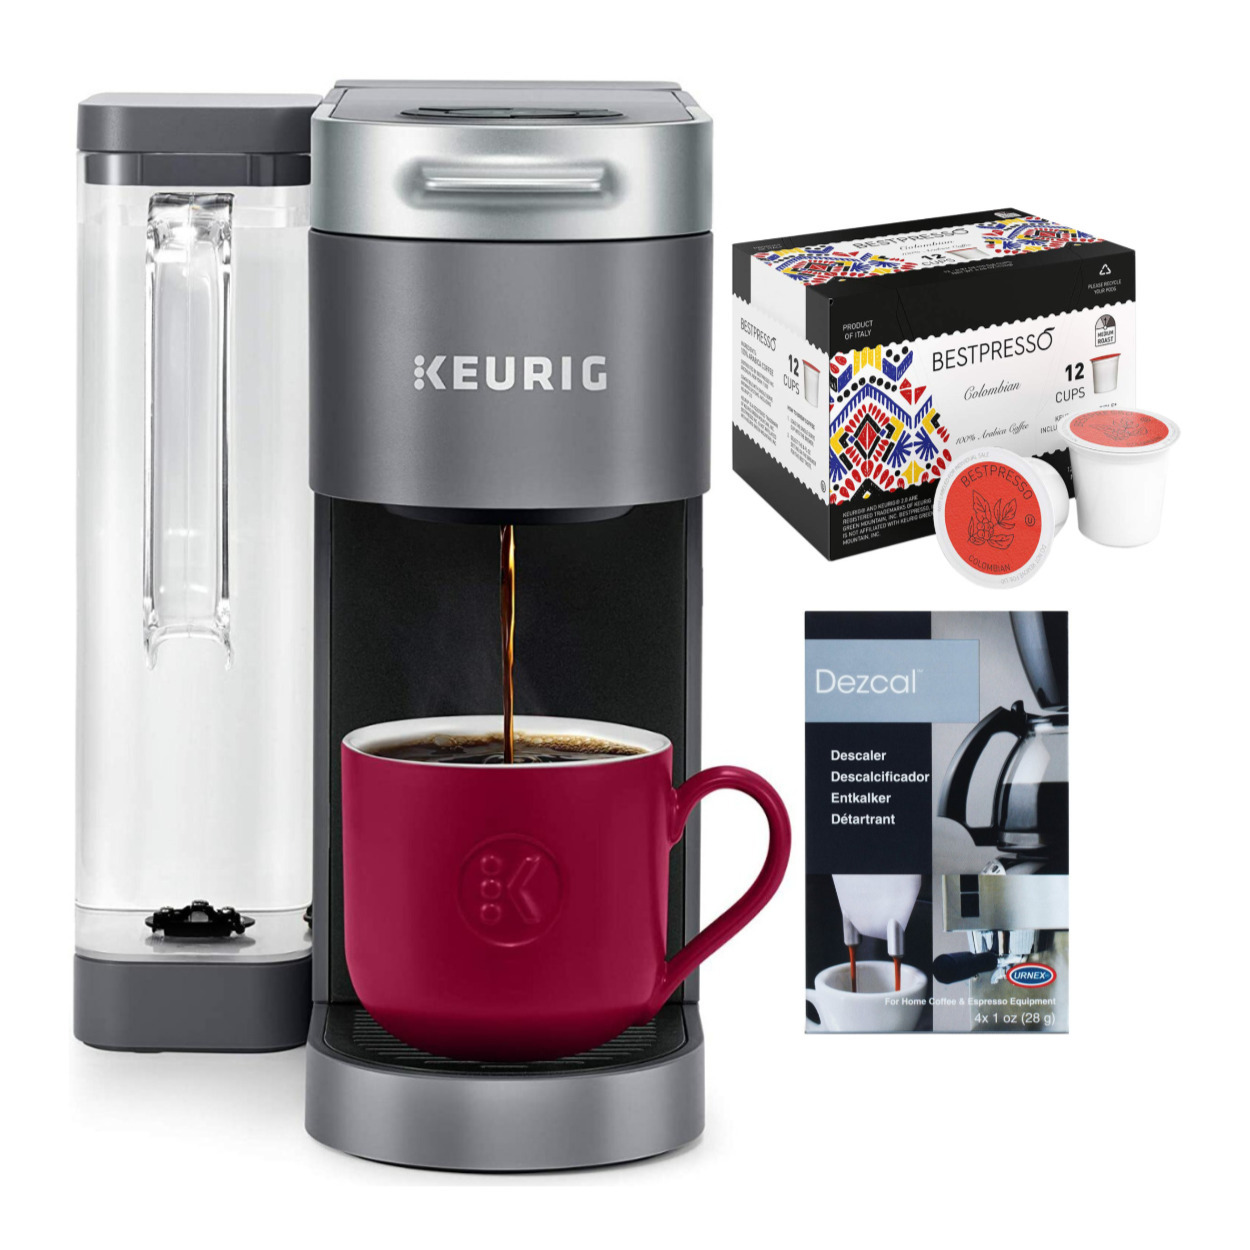 Keurig K-Supreme Single Serve Coffee Maker with Descaling Powder and K-Cup